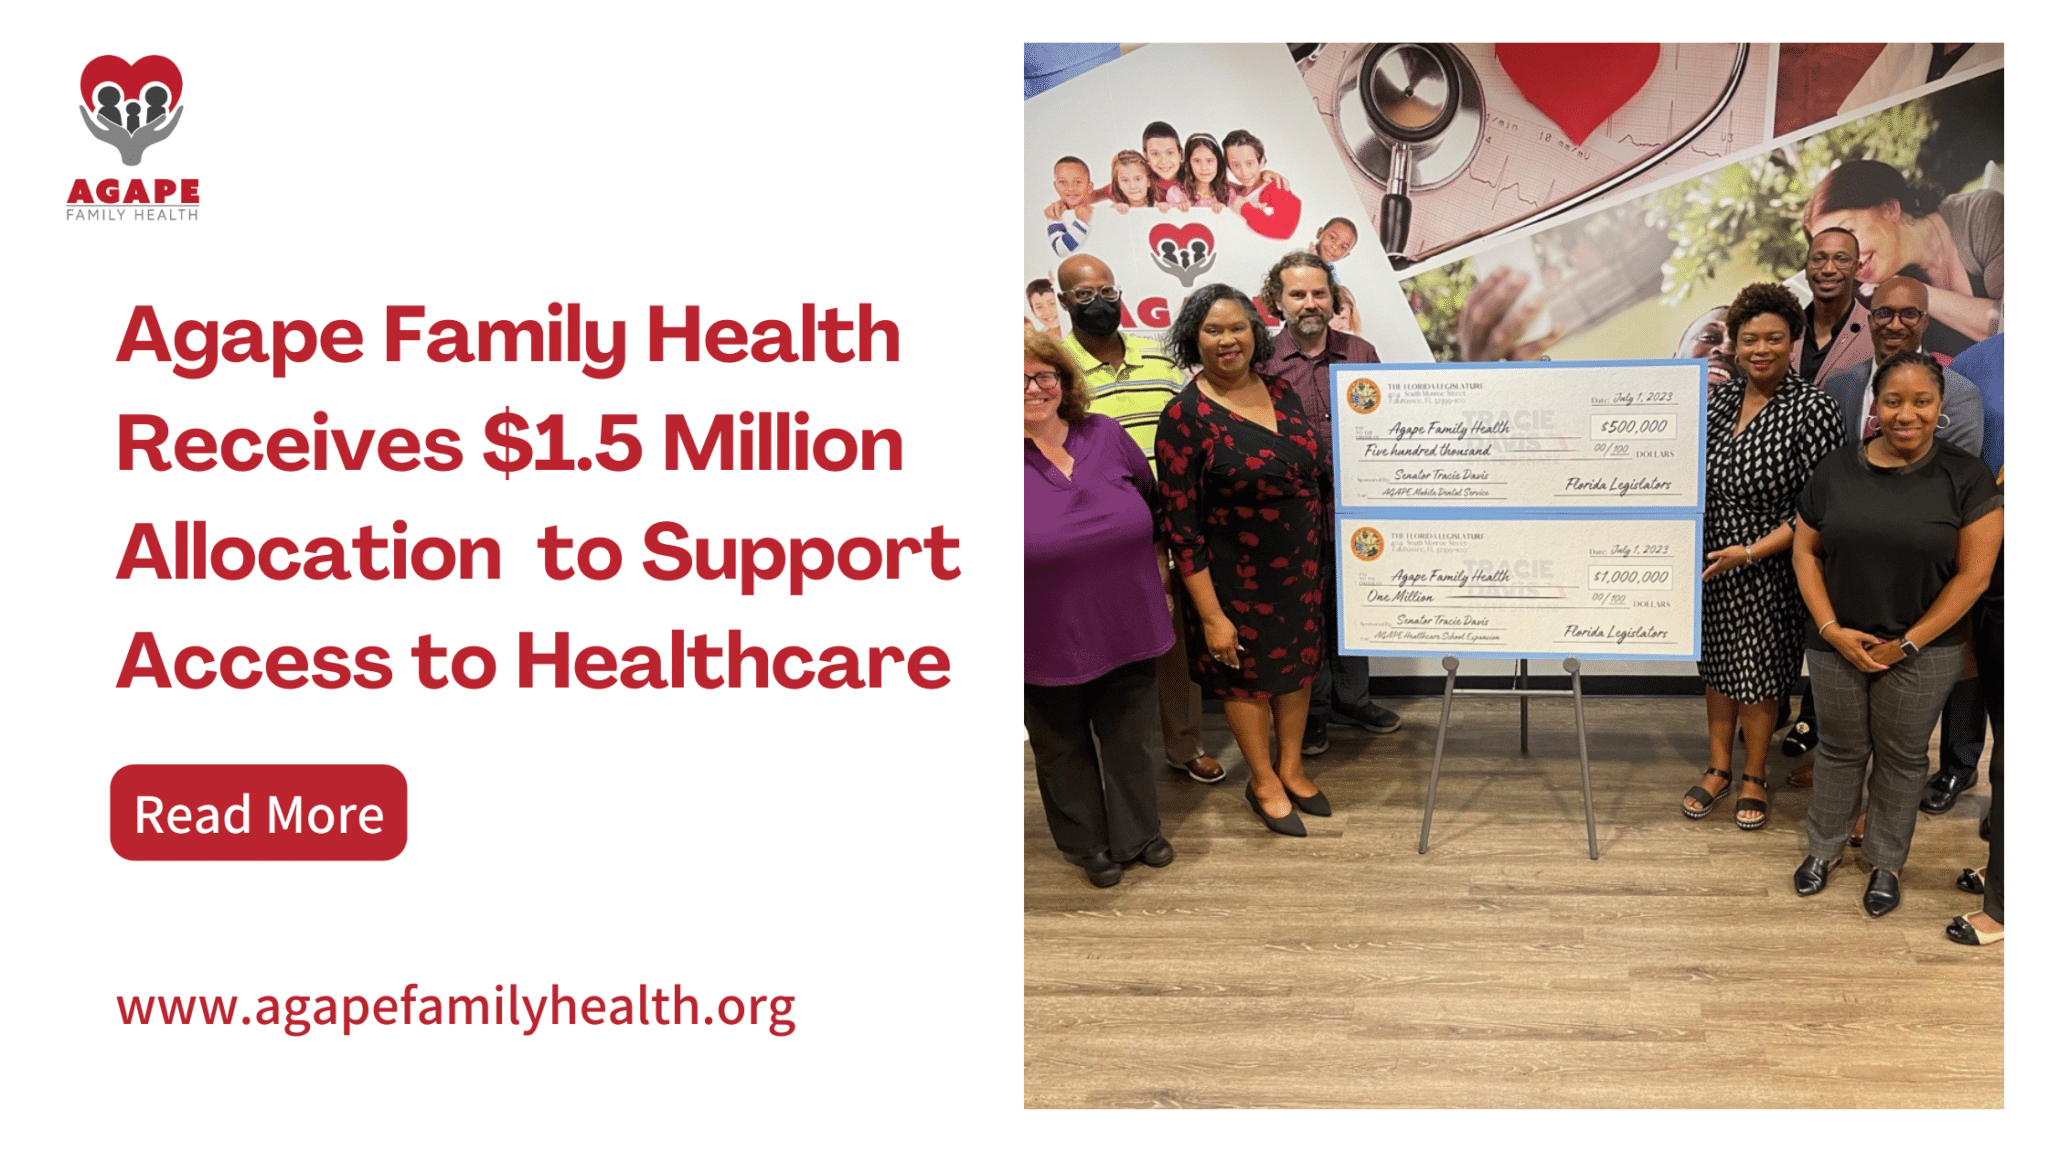 Agape Family Health Receives $1.5 Million Allocation to Support Access to Healthcare